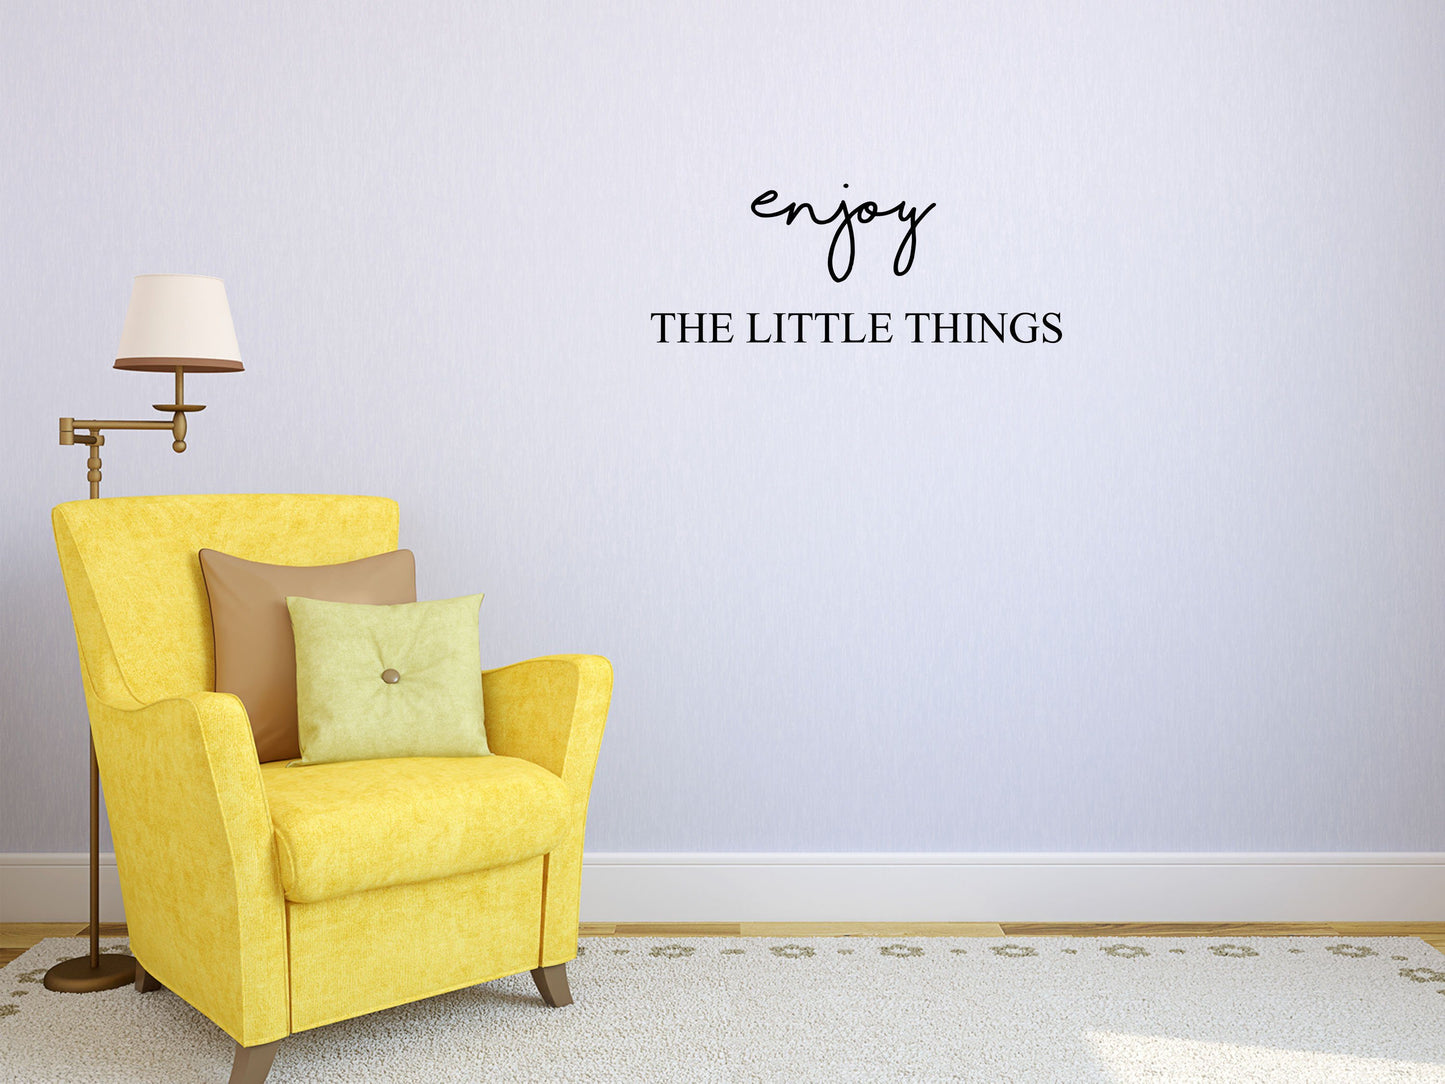 Enjoy The Little Things - Inspirational Wall Decals Vinyl Wall Decal Inspirational Wall Signs 